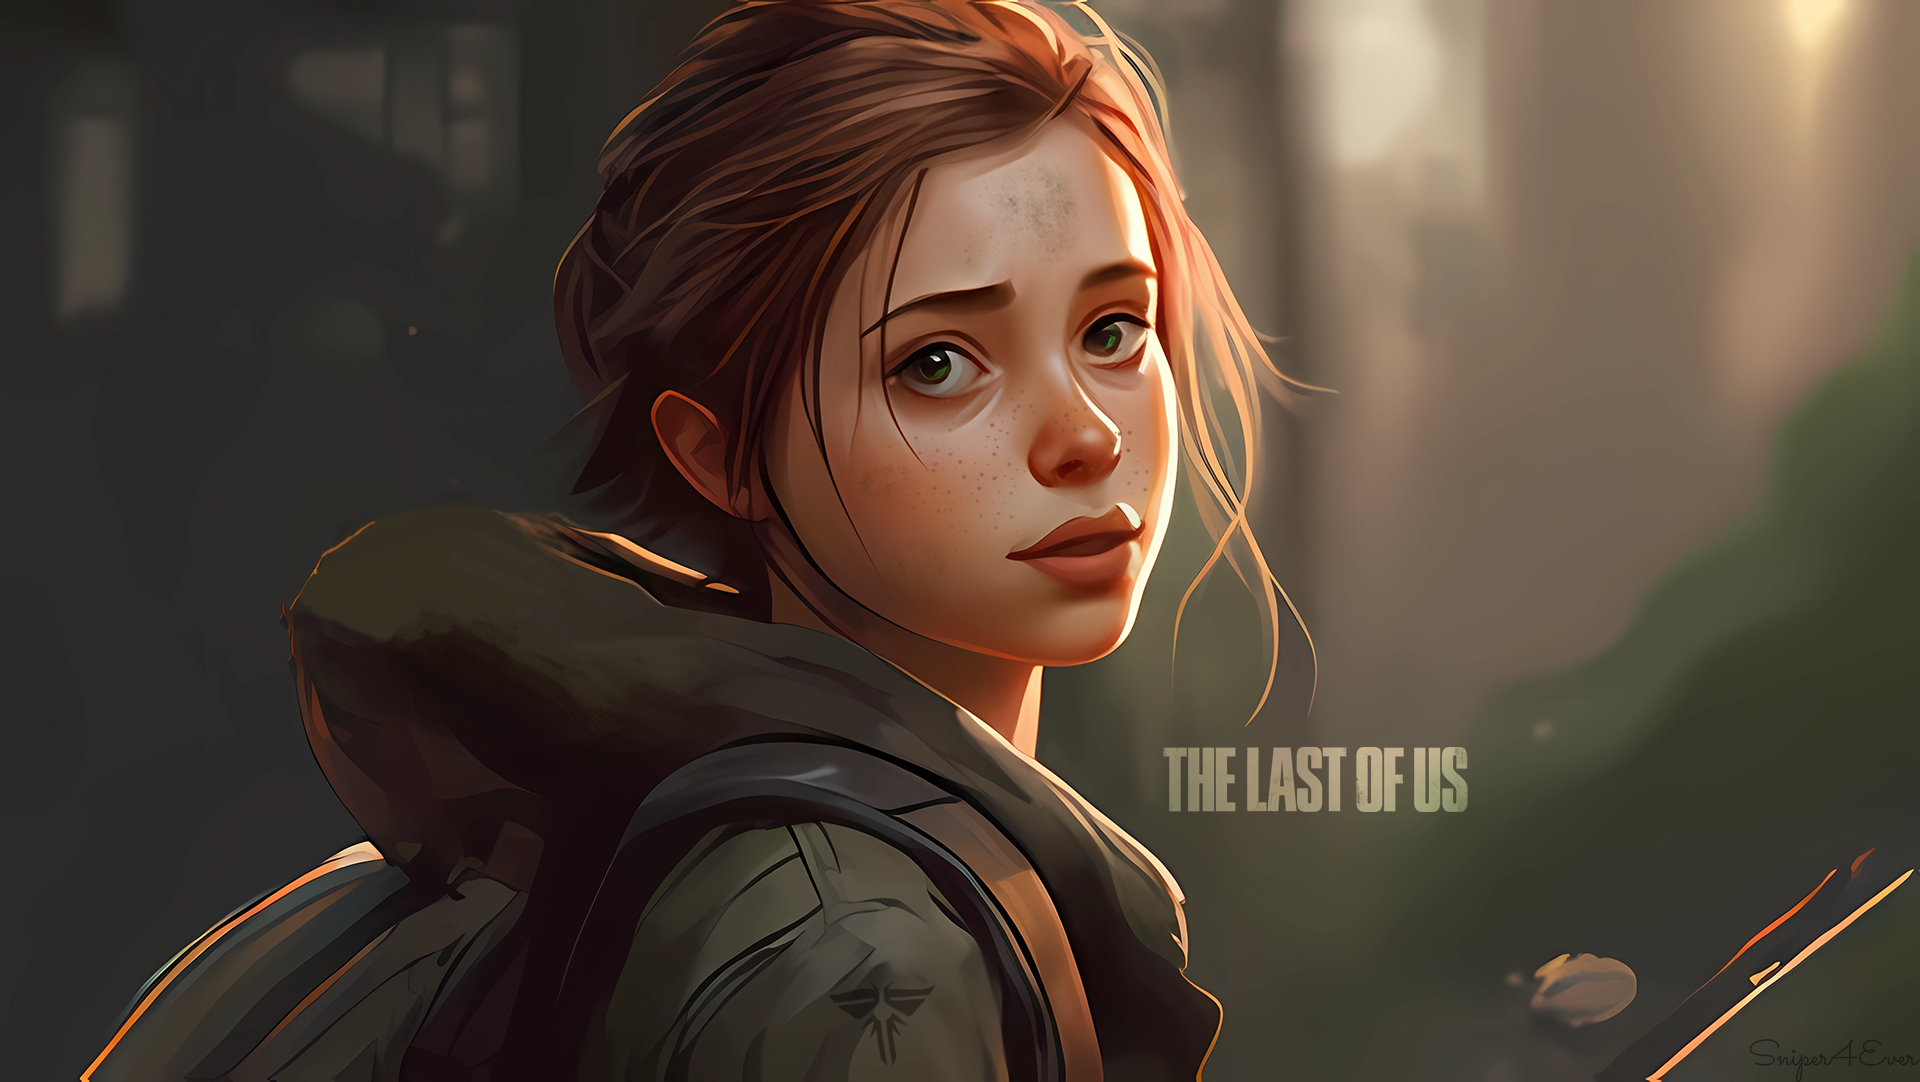 Download Ellie explores the world of The Last Of Us Wallpaper